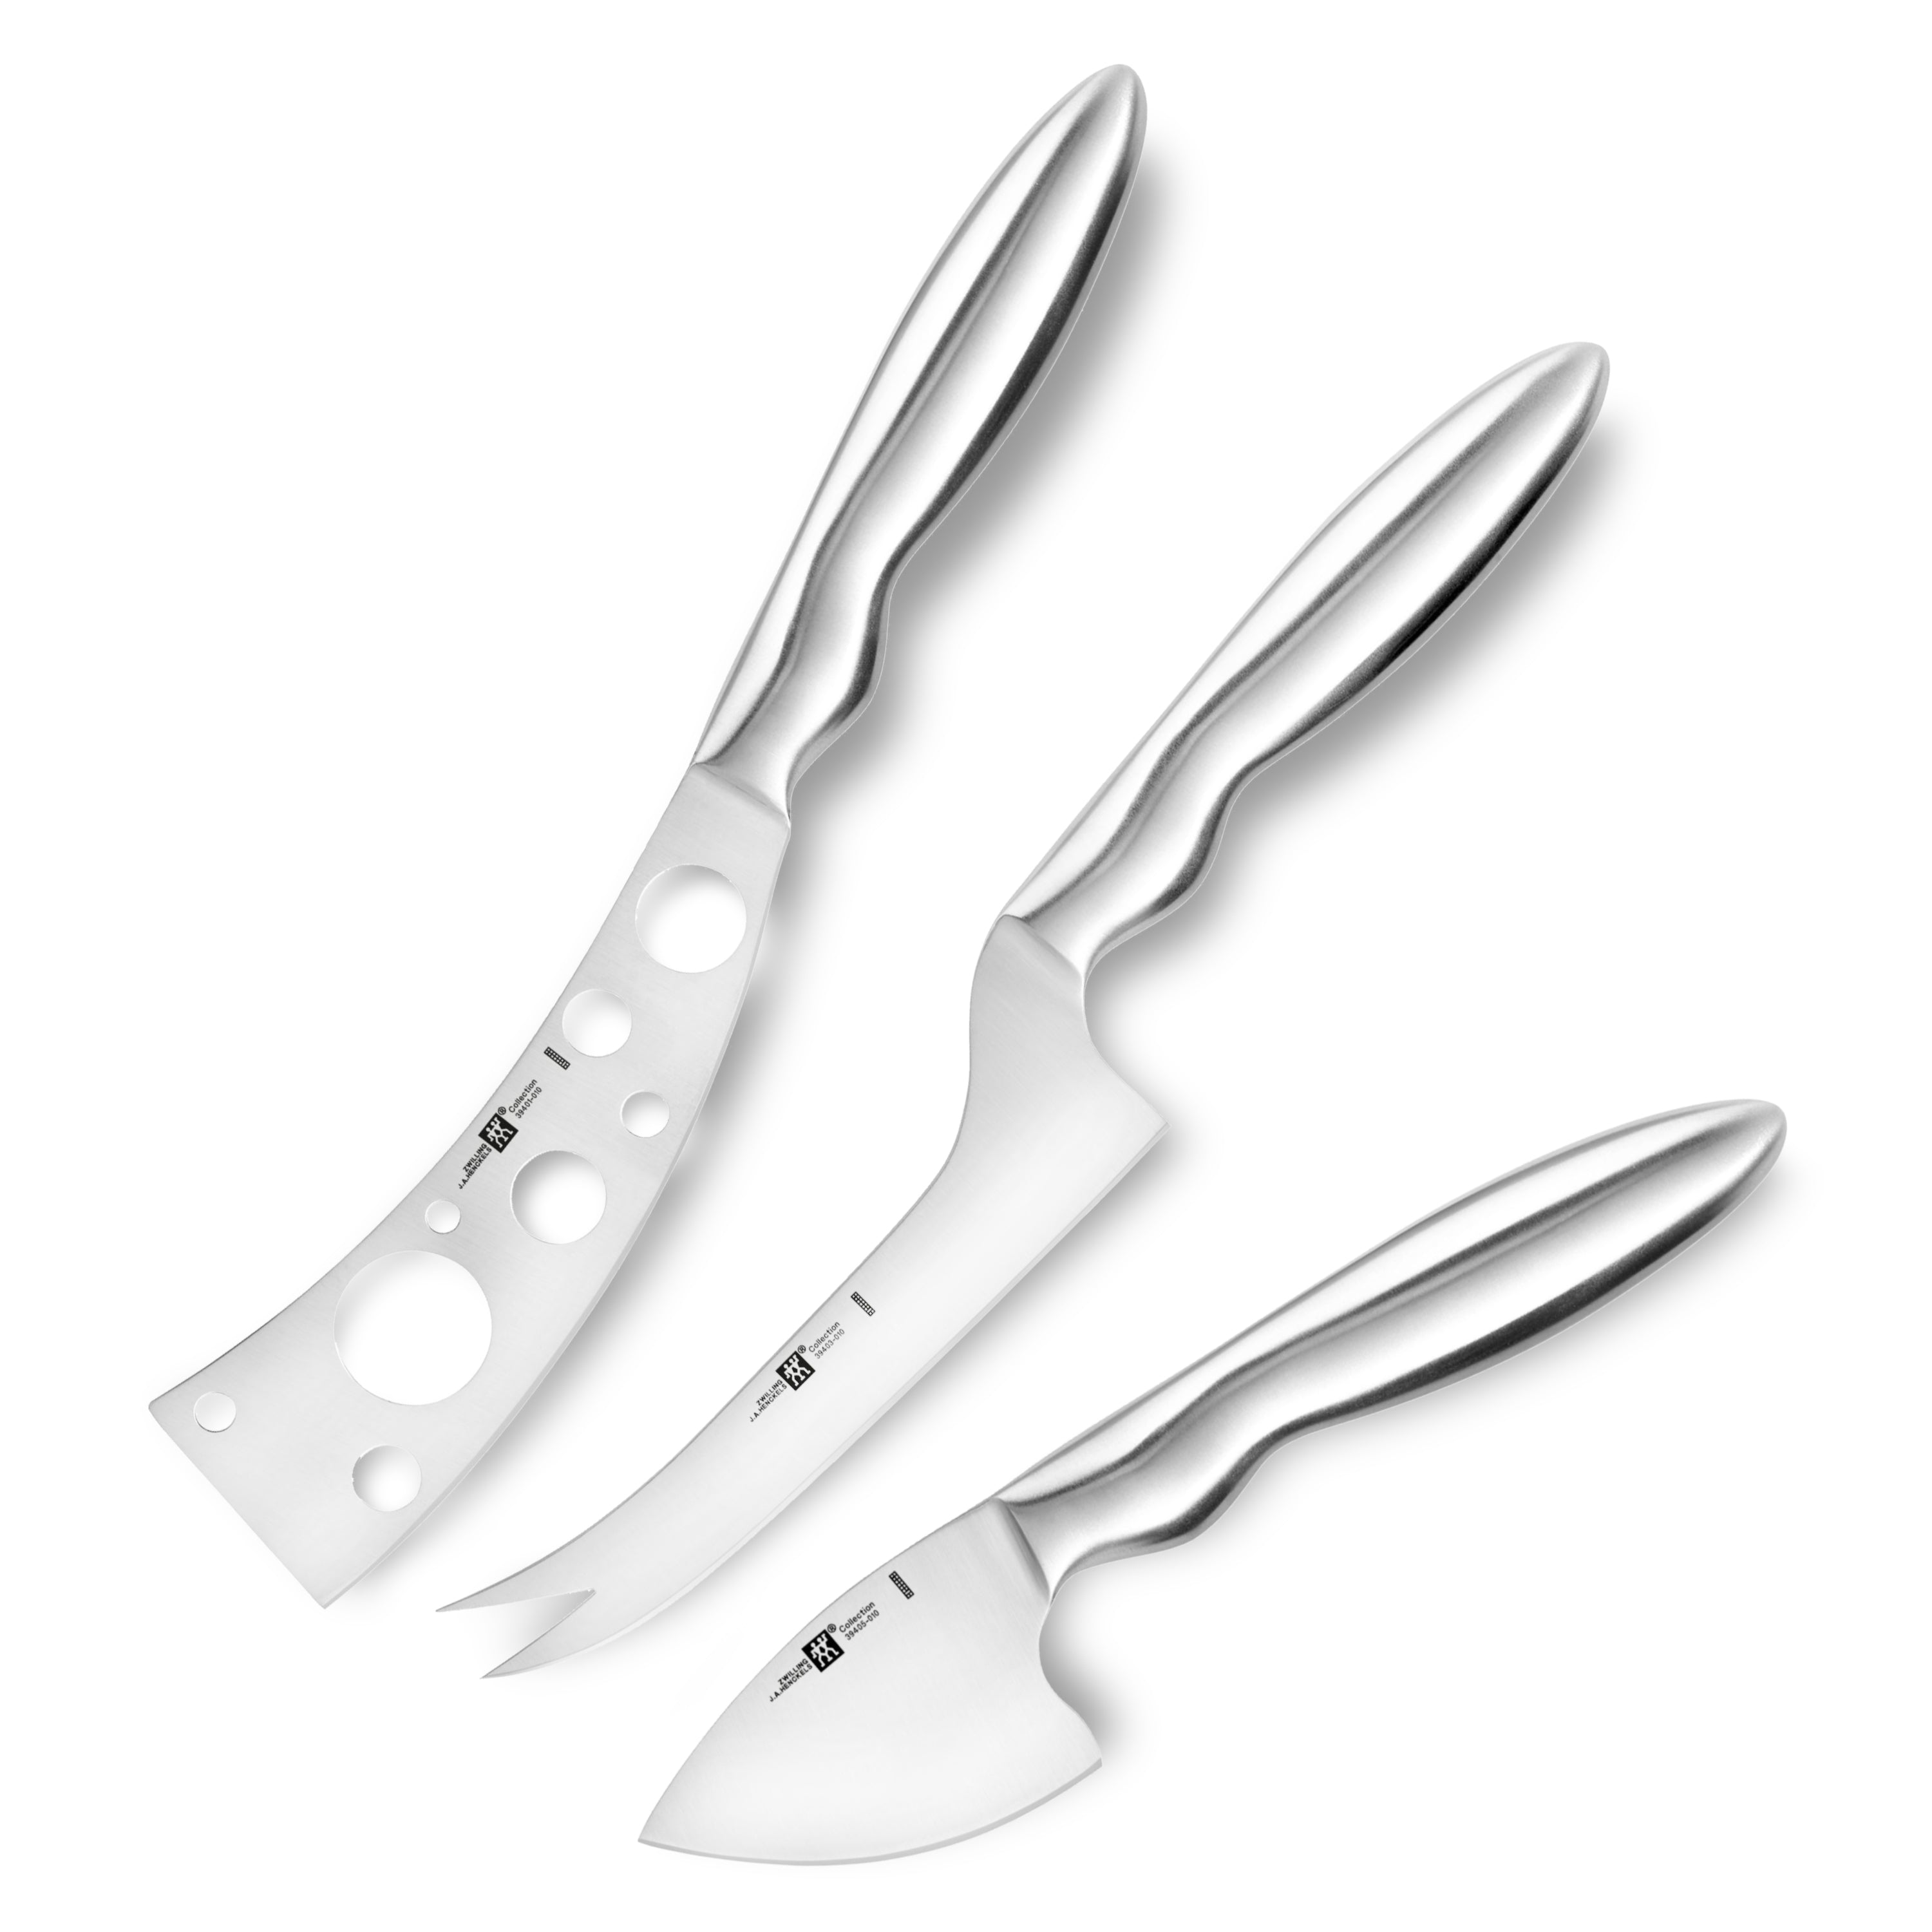 SideDeal: Kitchen HQ 3-Piece Forged Knife Set